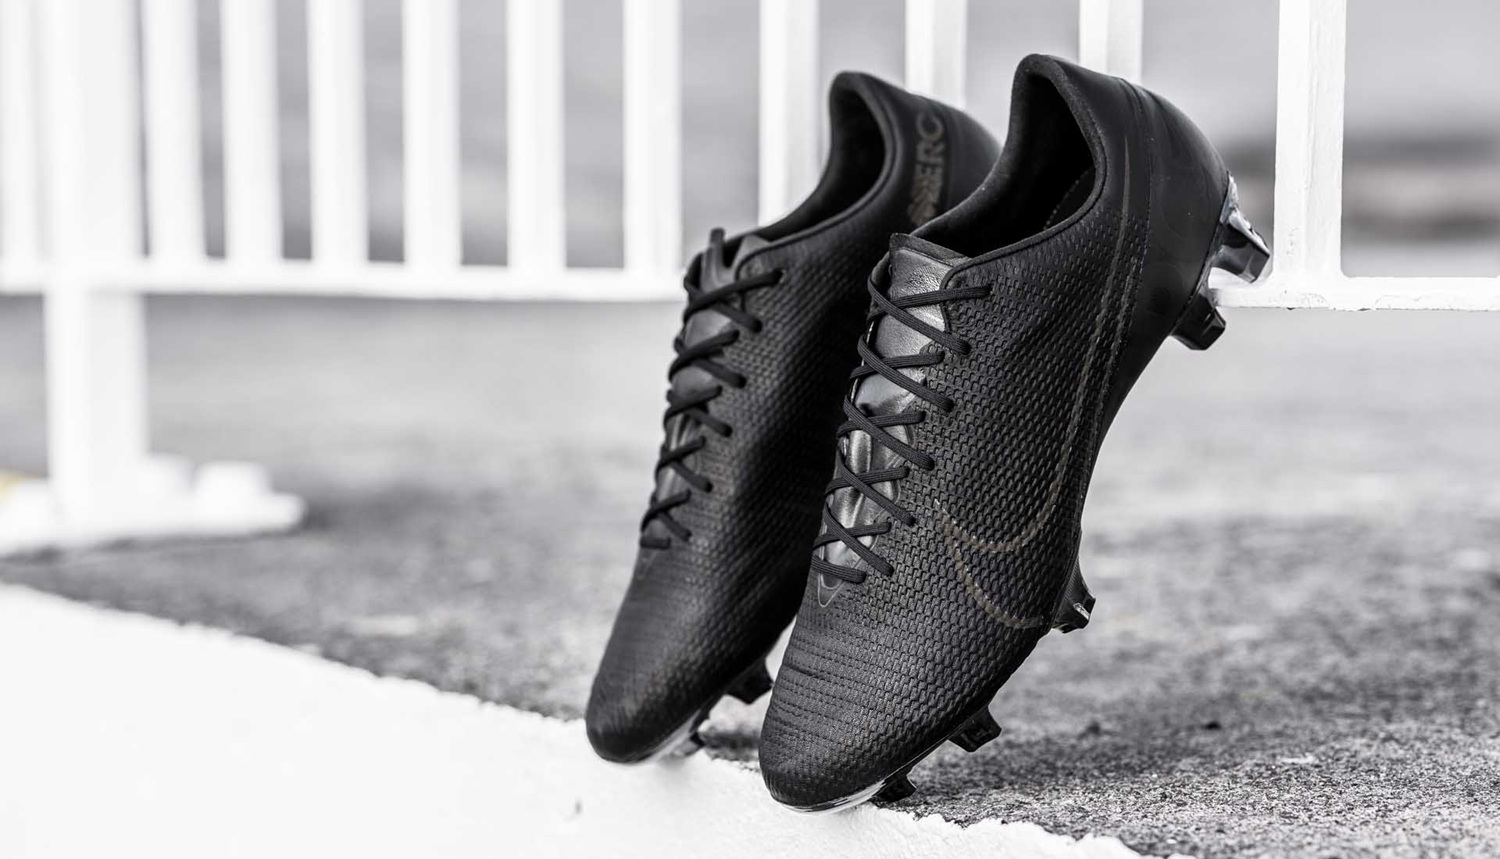 THE BEST $80 BOOTS EVER NIKE PHANTOM VISION ACADEMY